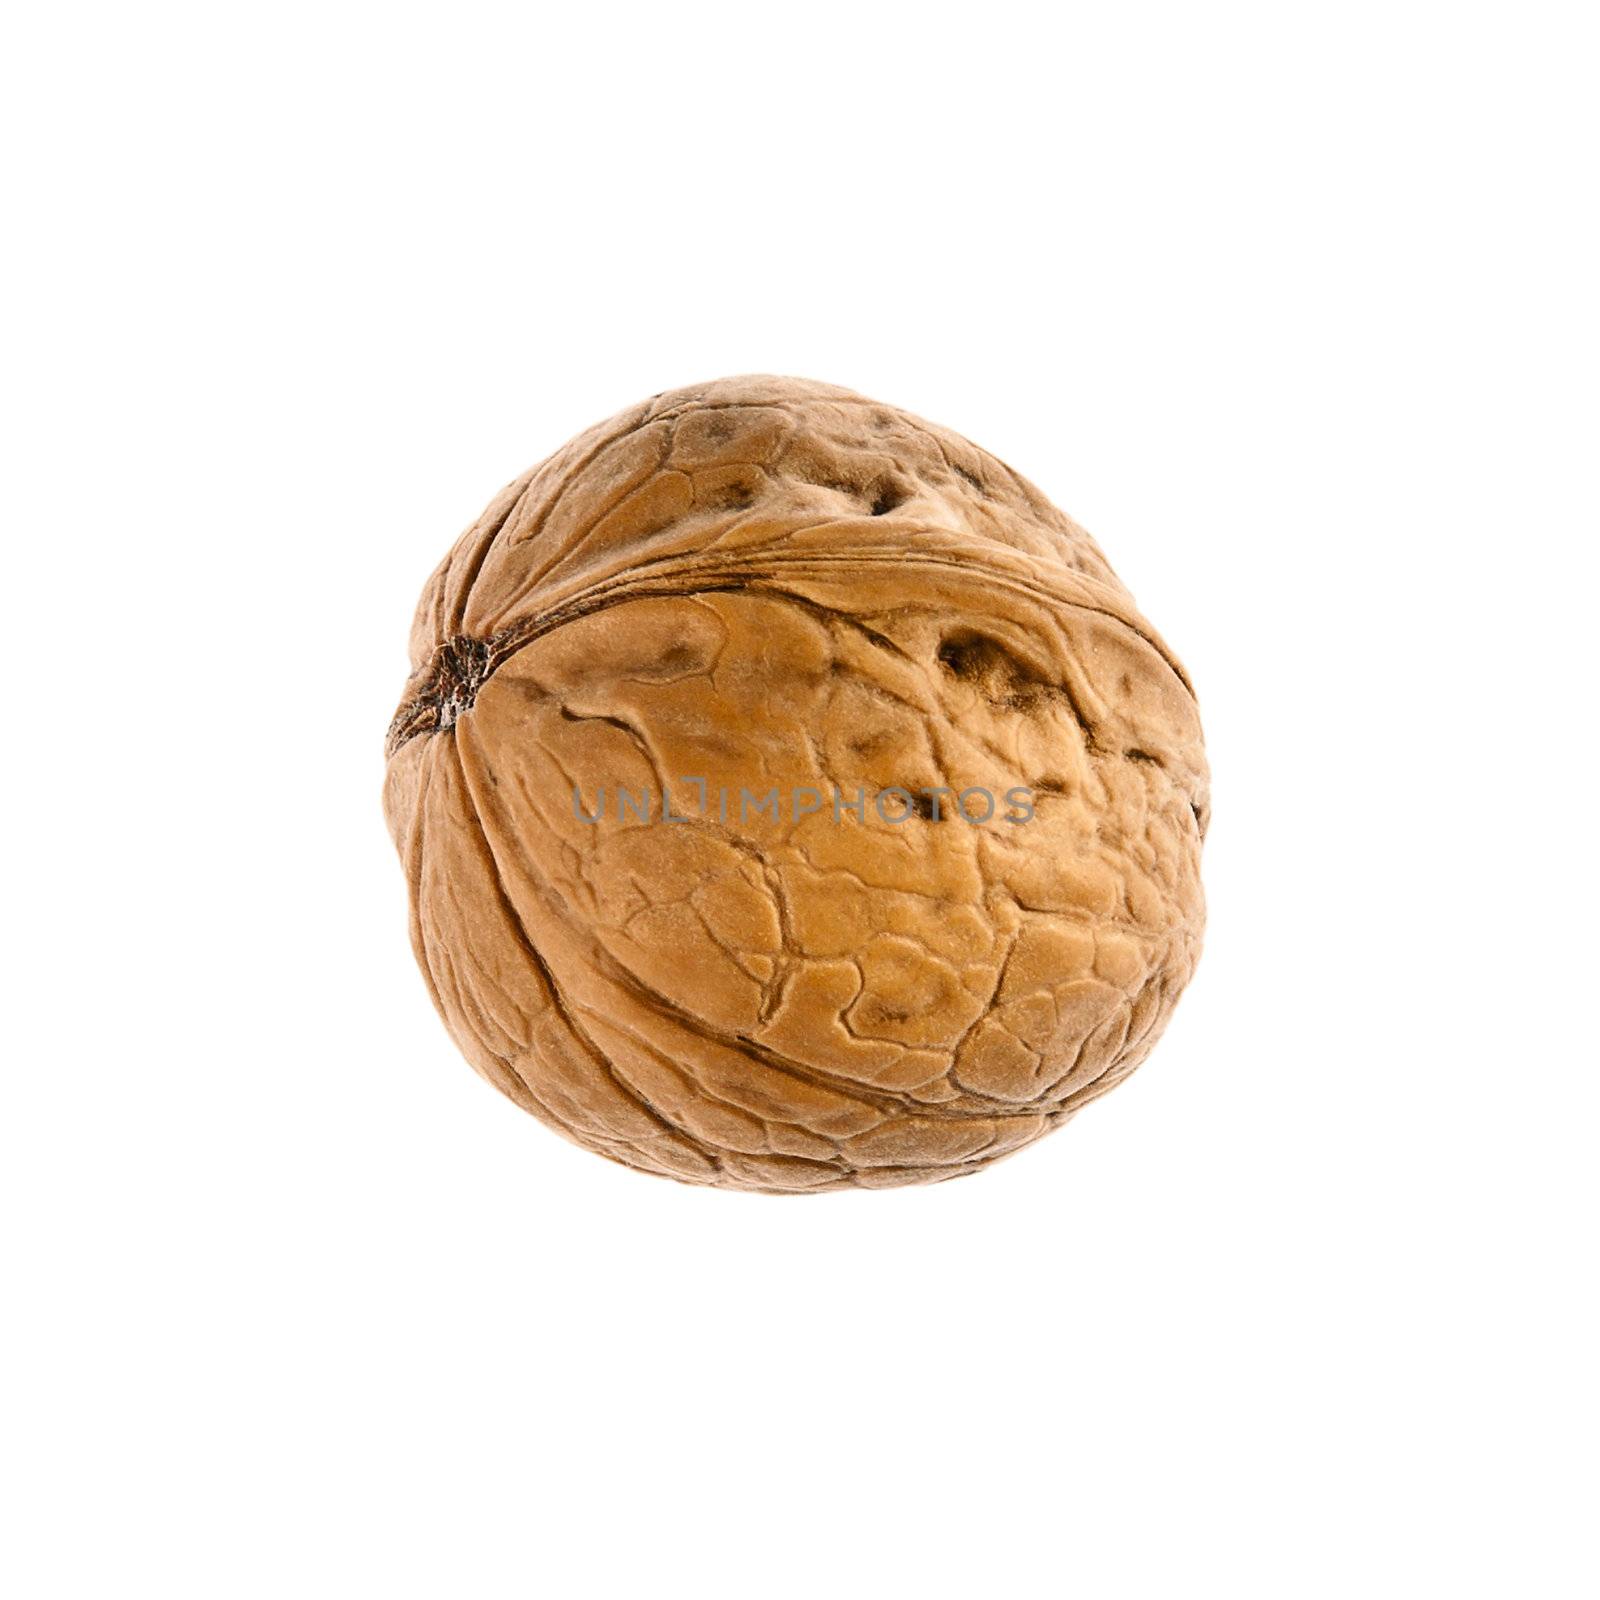 One closed walnut isolated on a white background.